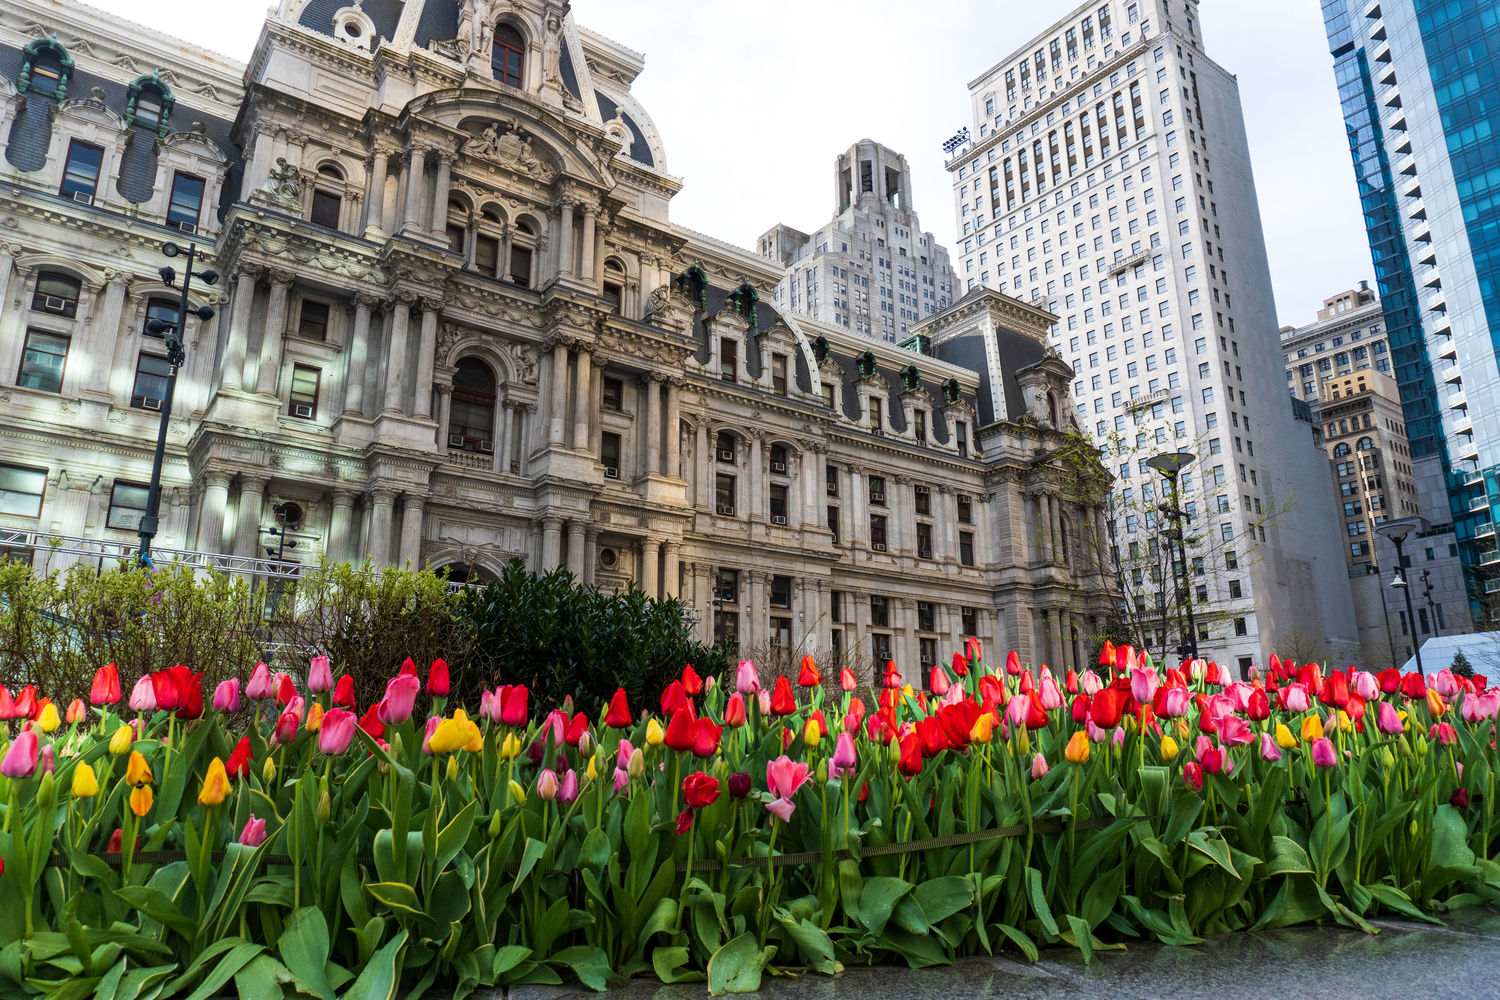 Tulips bloom in Spring right infront of Philly's City Hall for a great visit during my Philly solo trip.